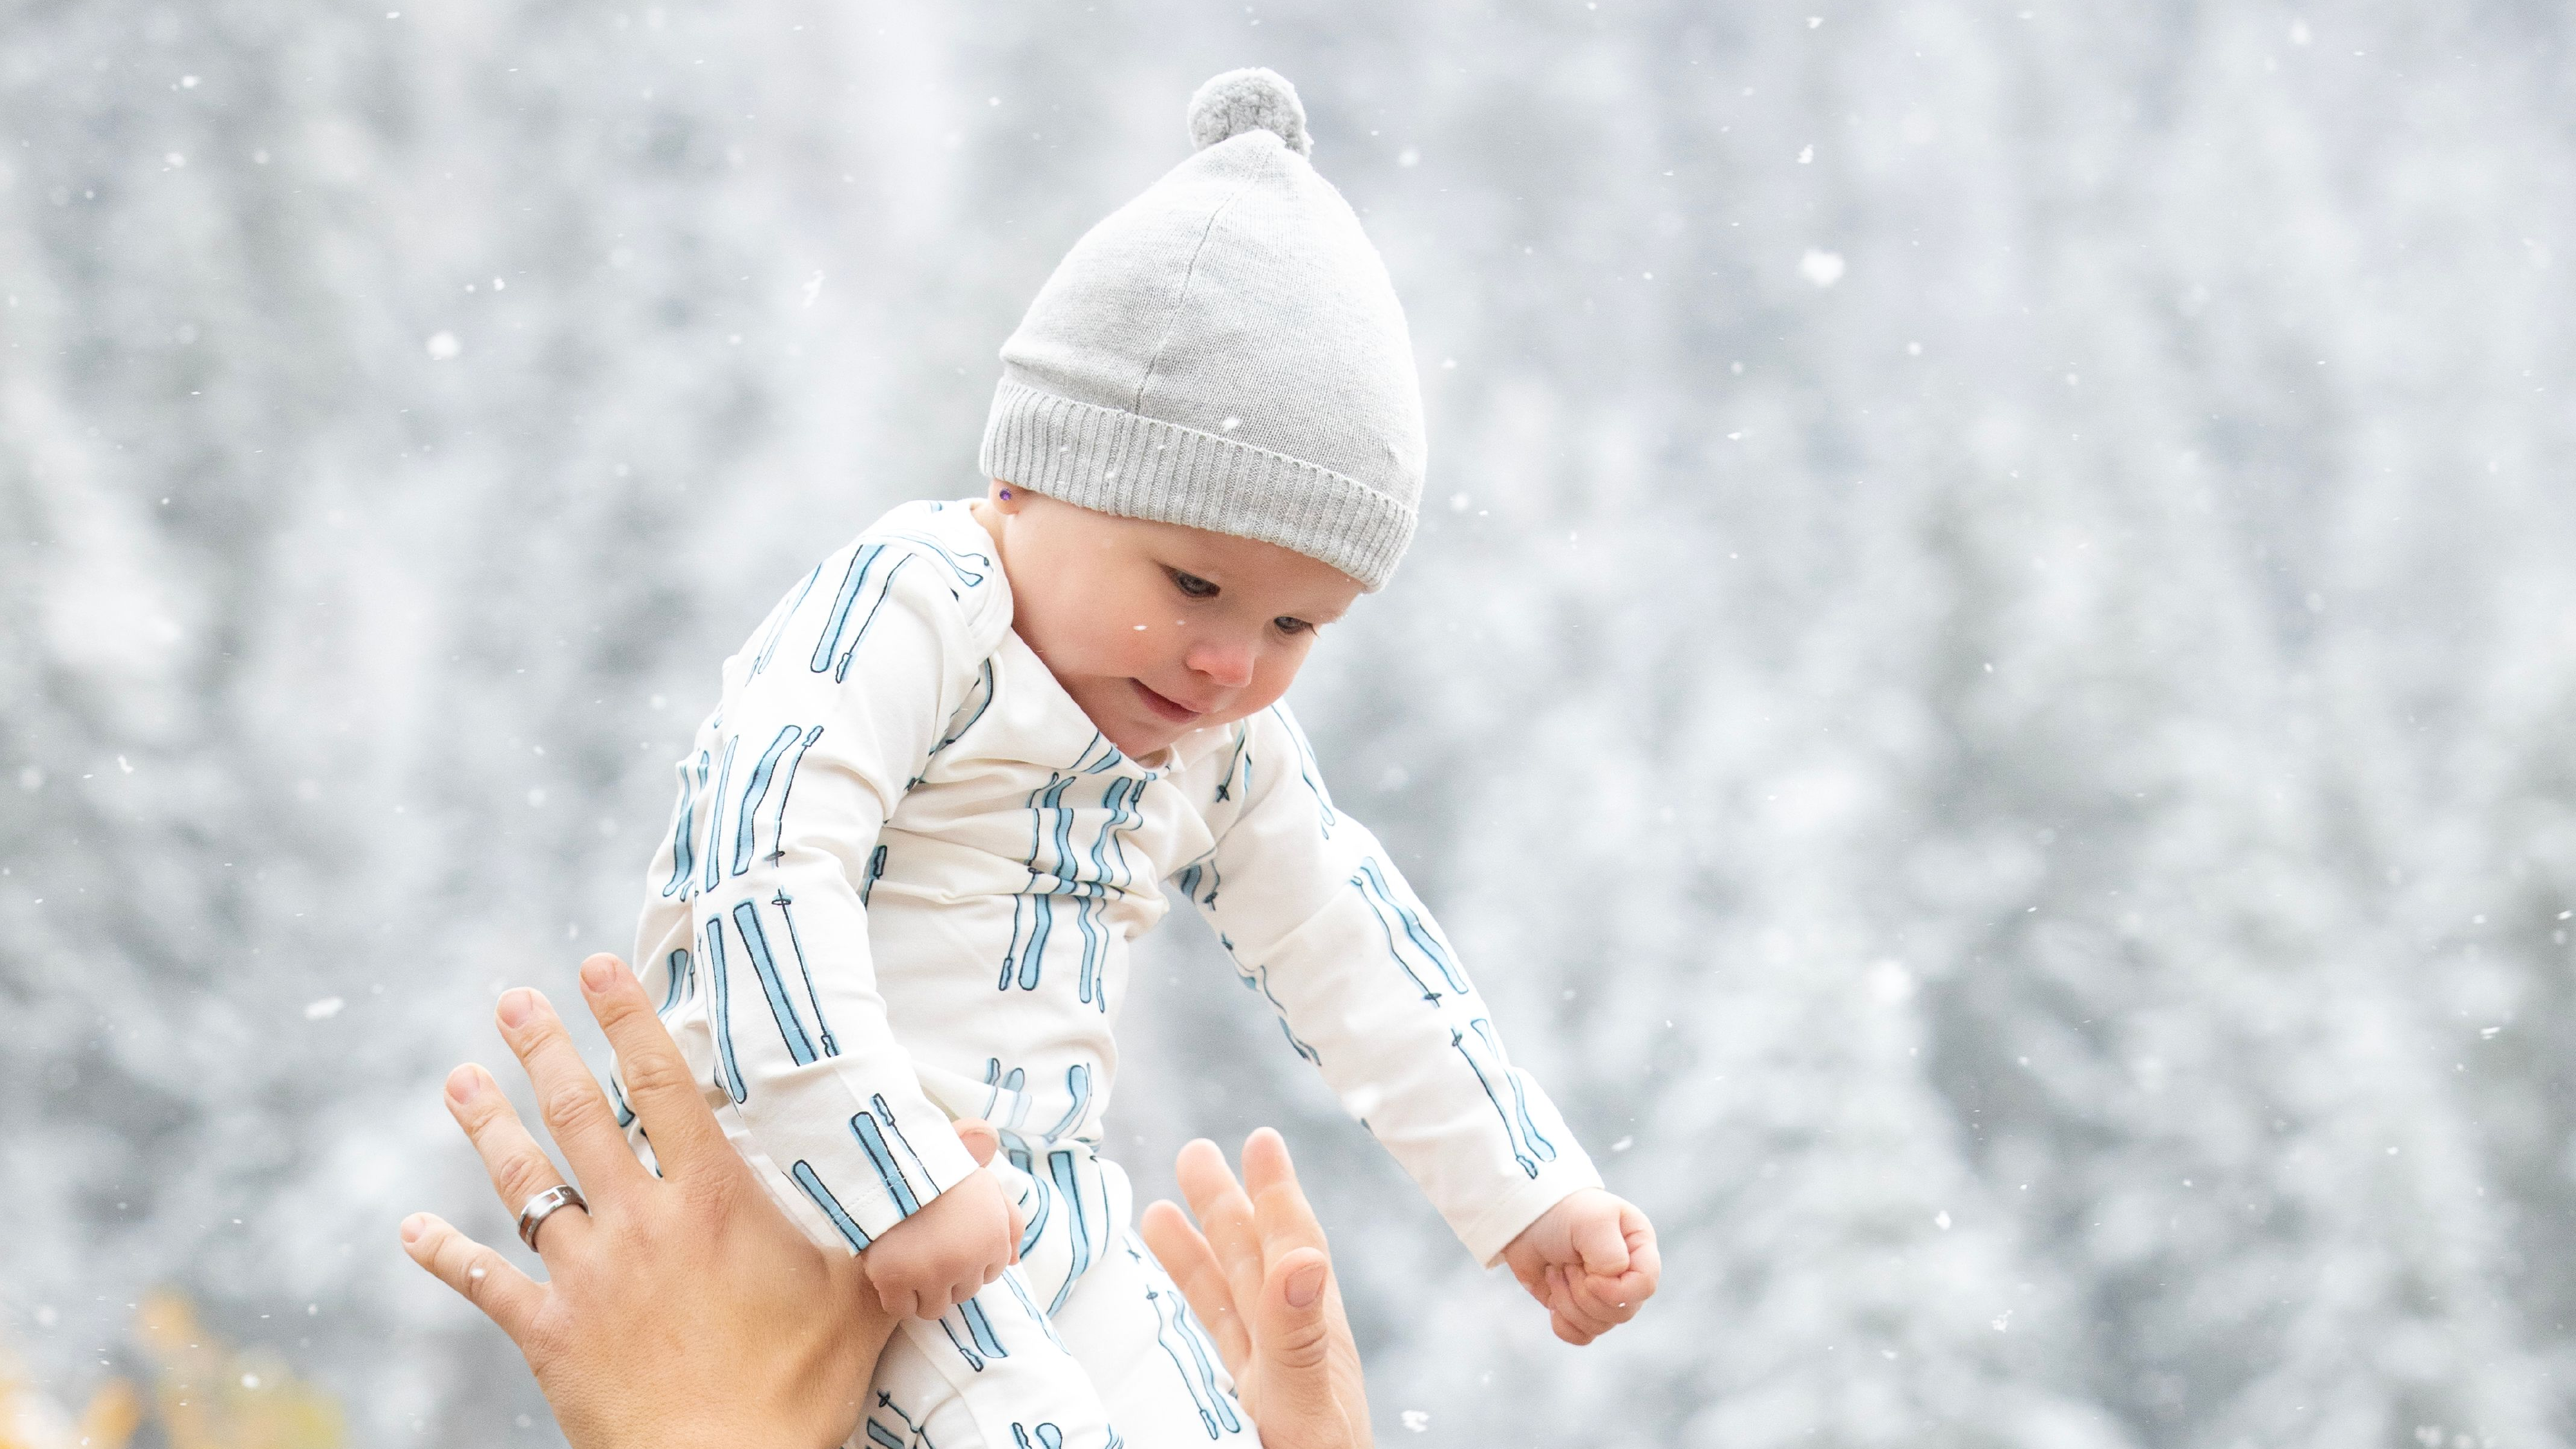 How To Dress Baby For Snow